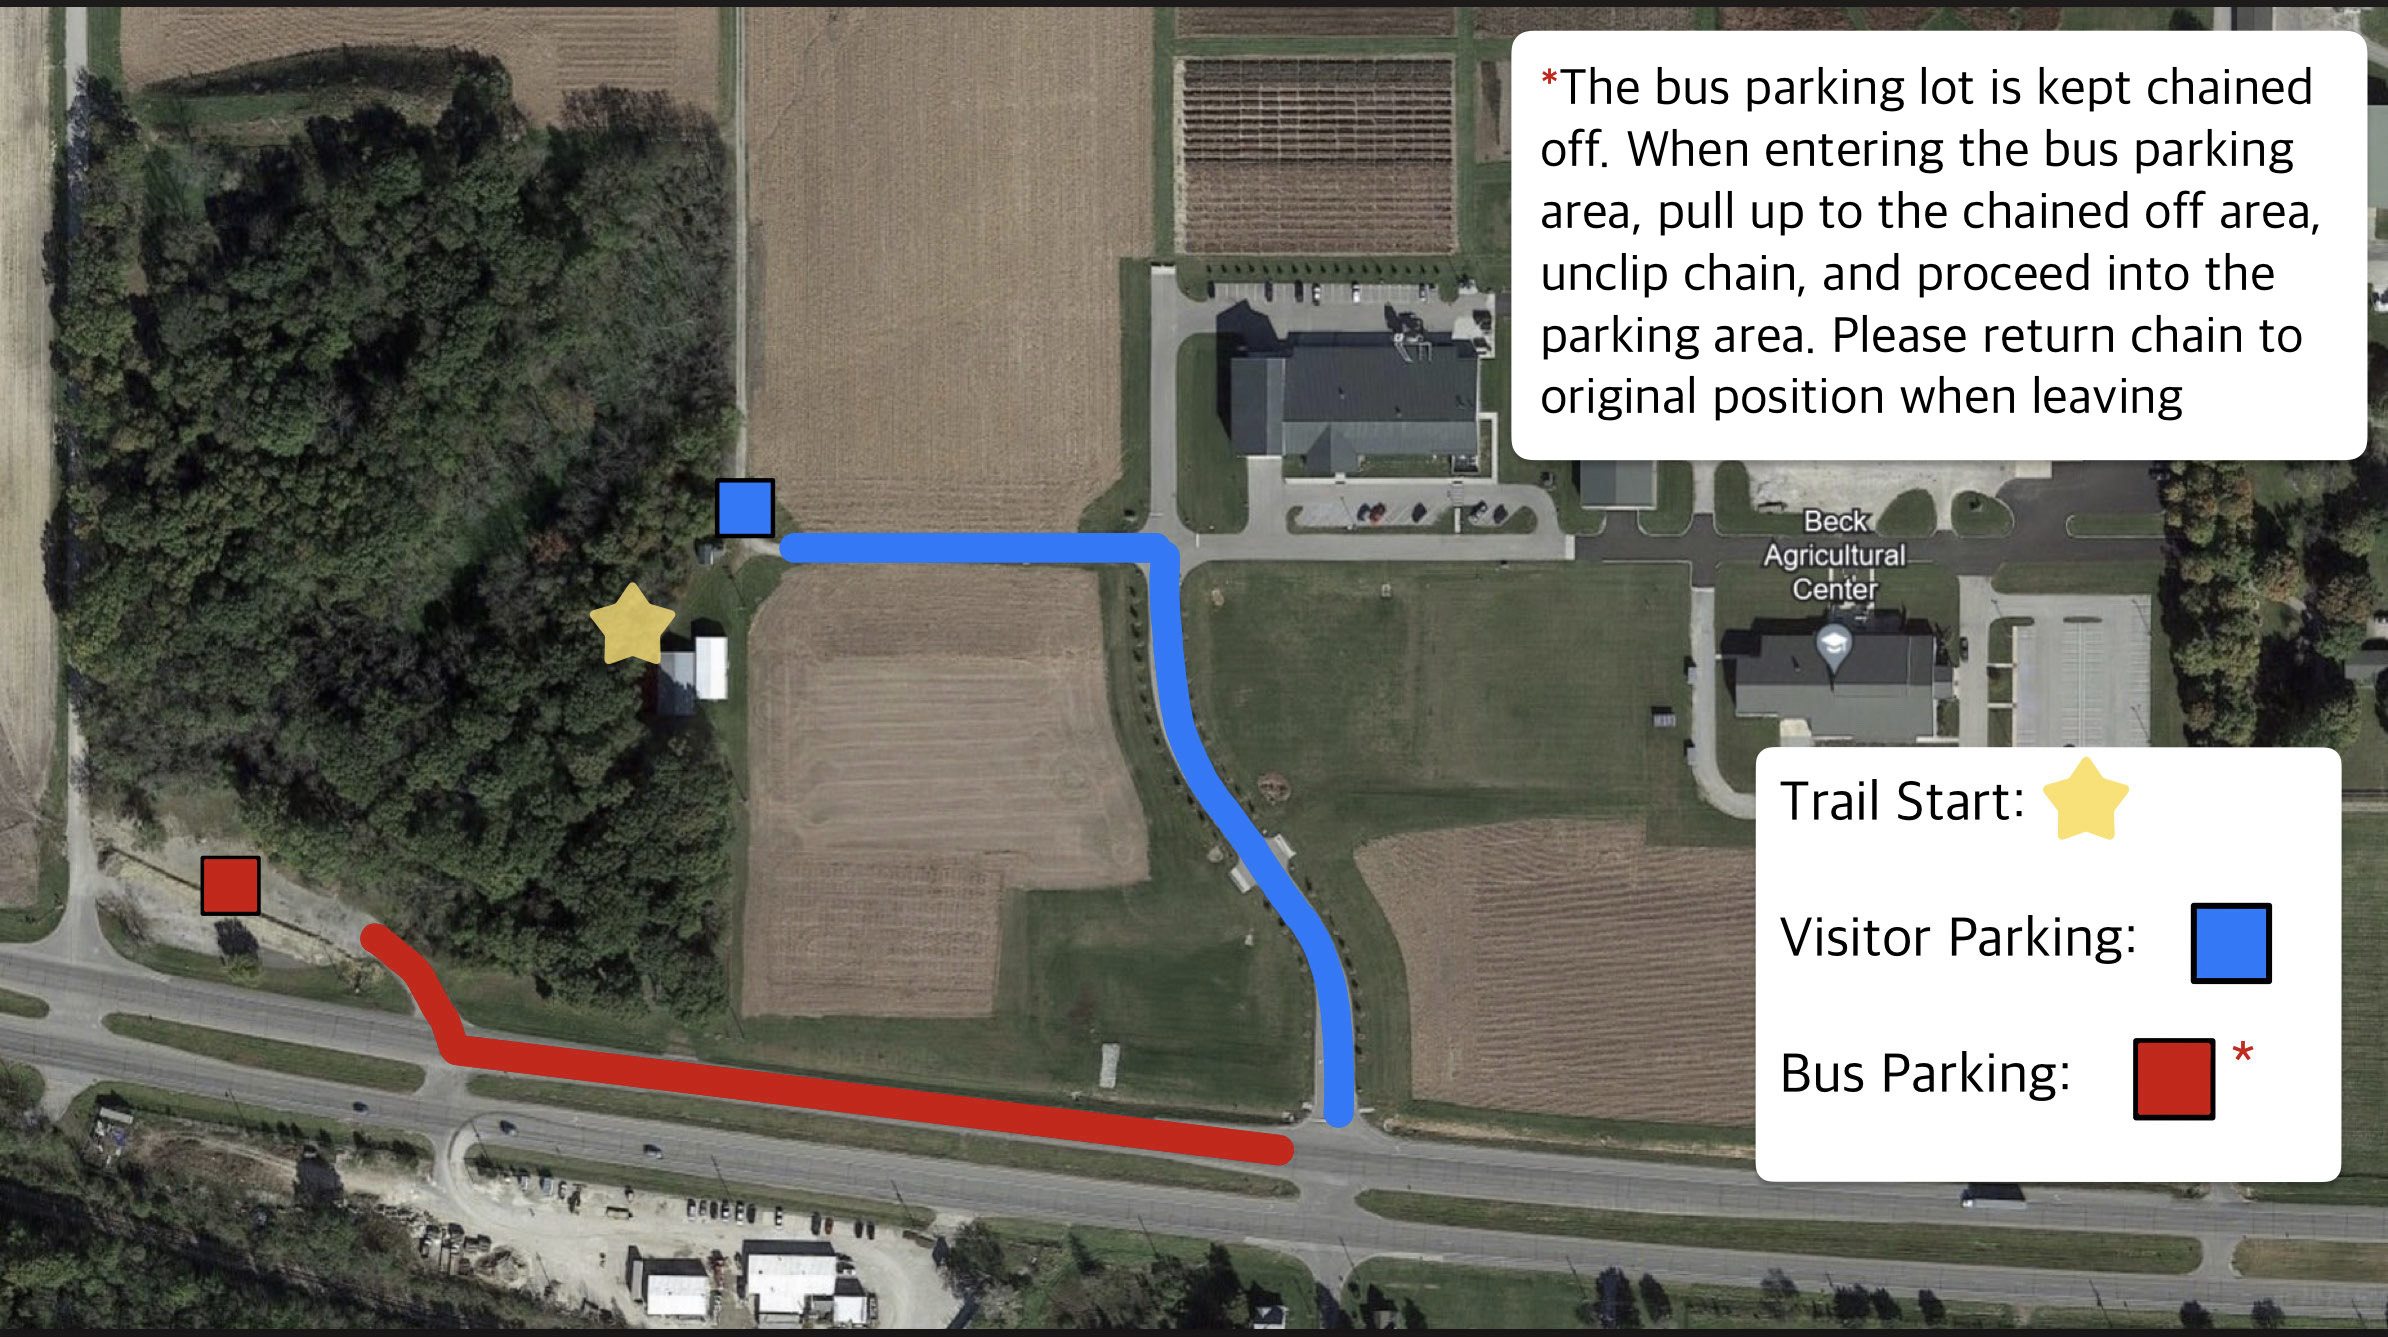 Visitors should park near the trail entrance. Buses should park in the lot next to the highway.